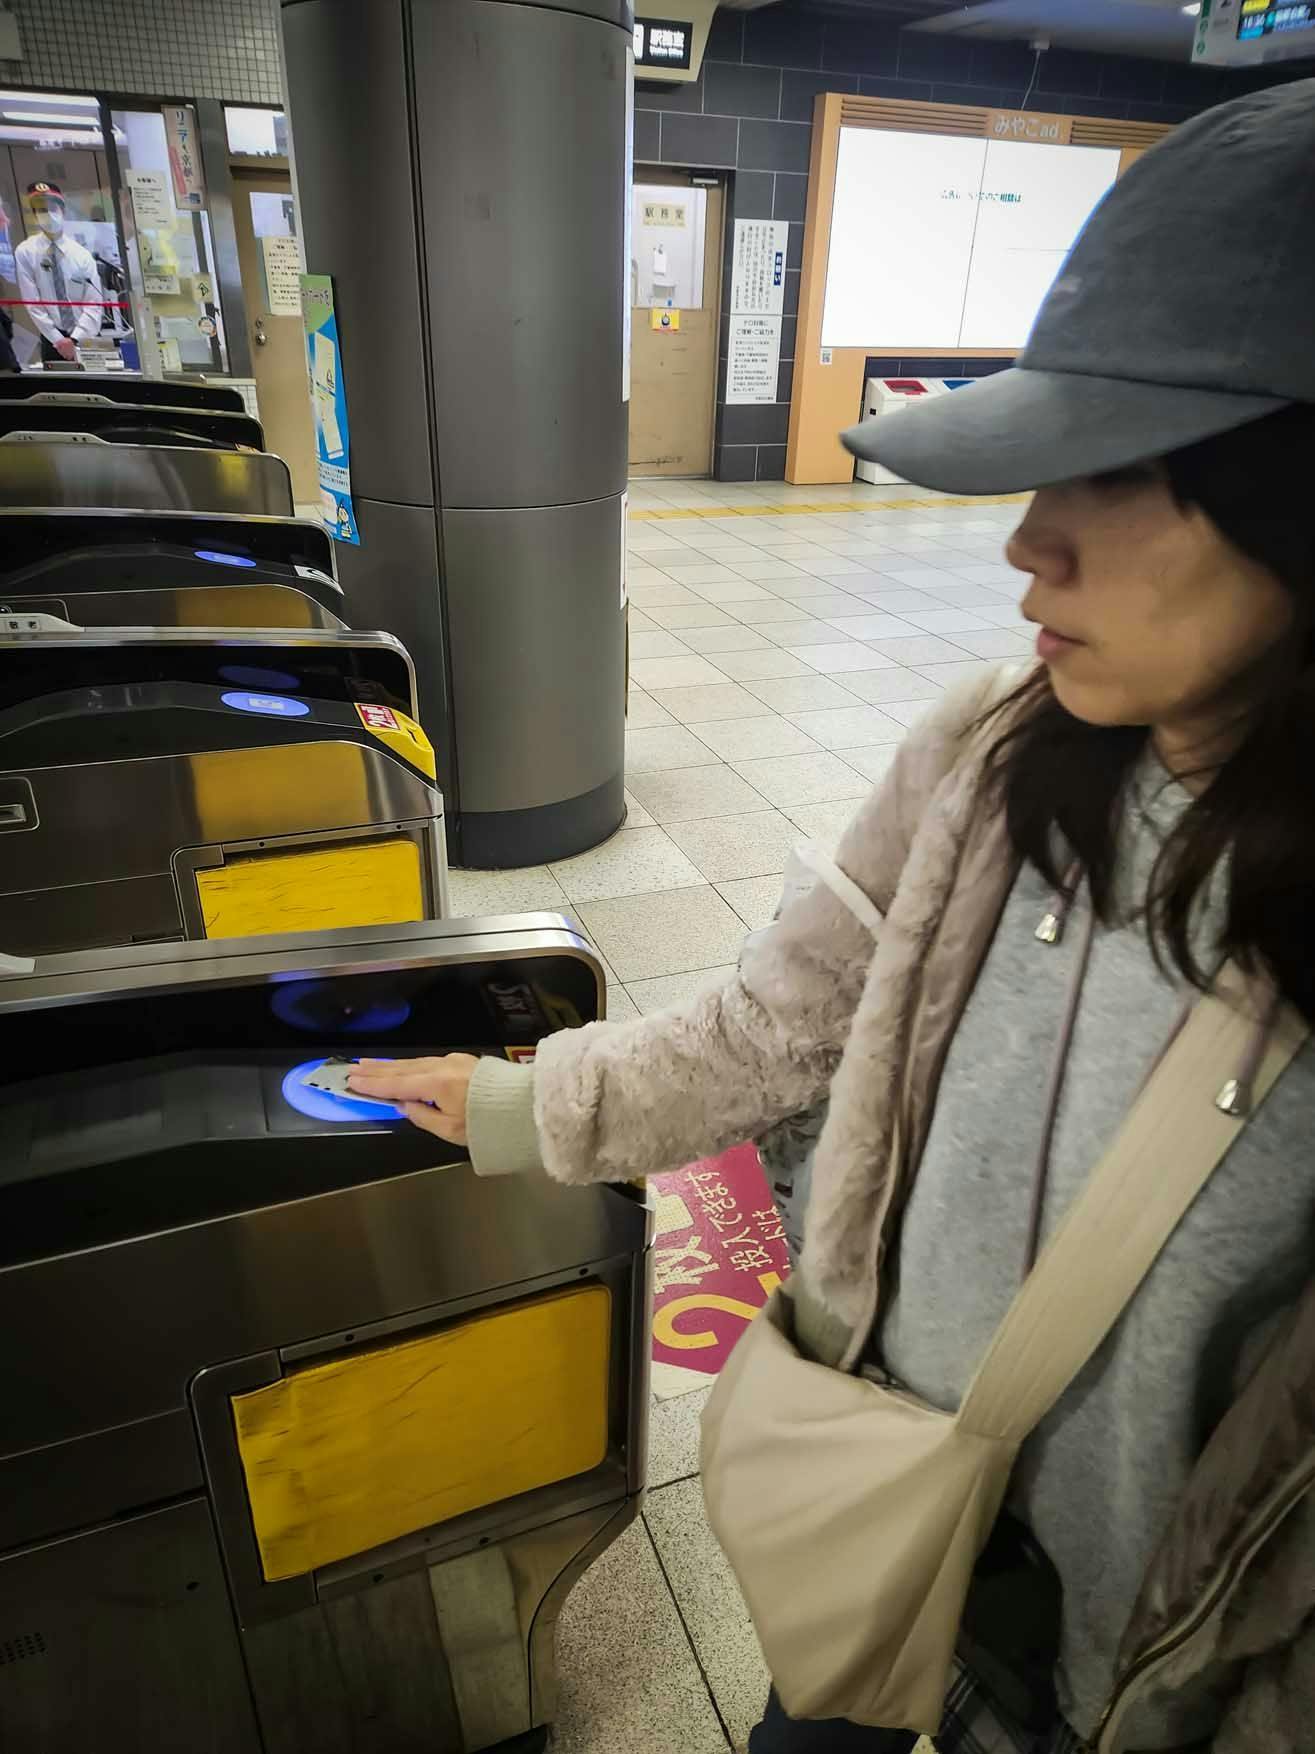 Tapping the IC card on the card-reader to exit the subway station. Photo source: James Saunders-Wyndham